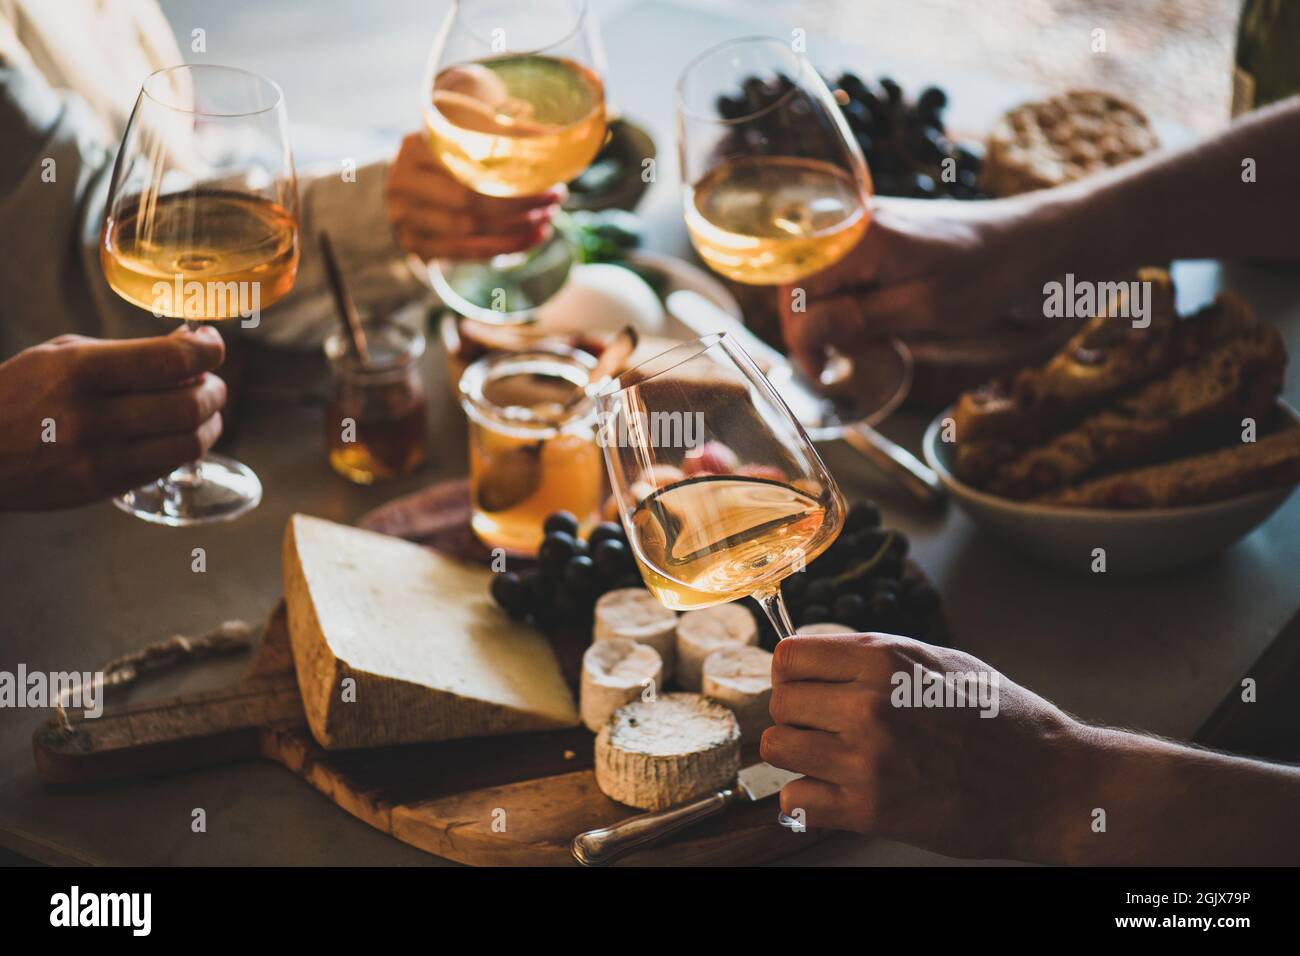 Hands of people holding wineglasses with orange or rose wine Stock Photo